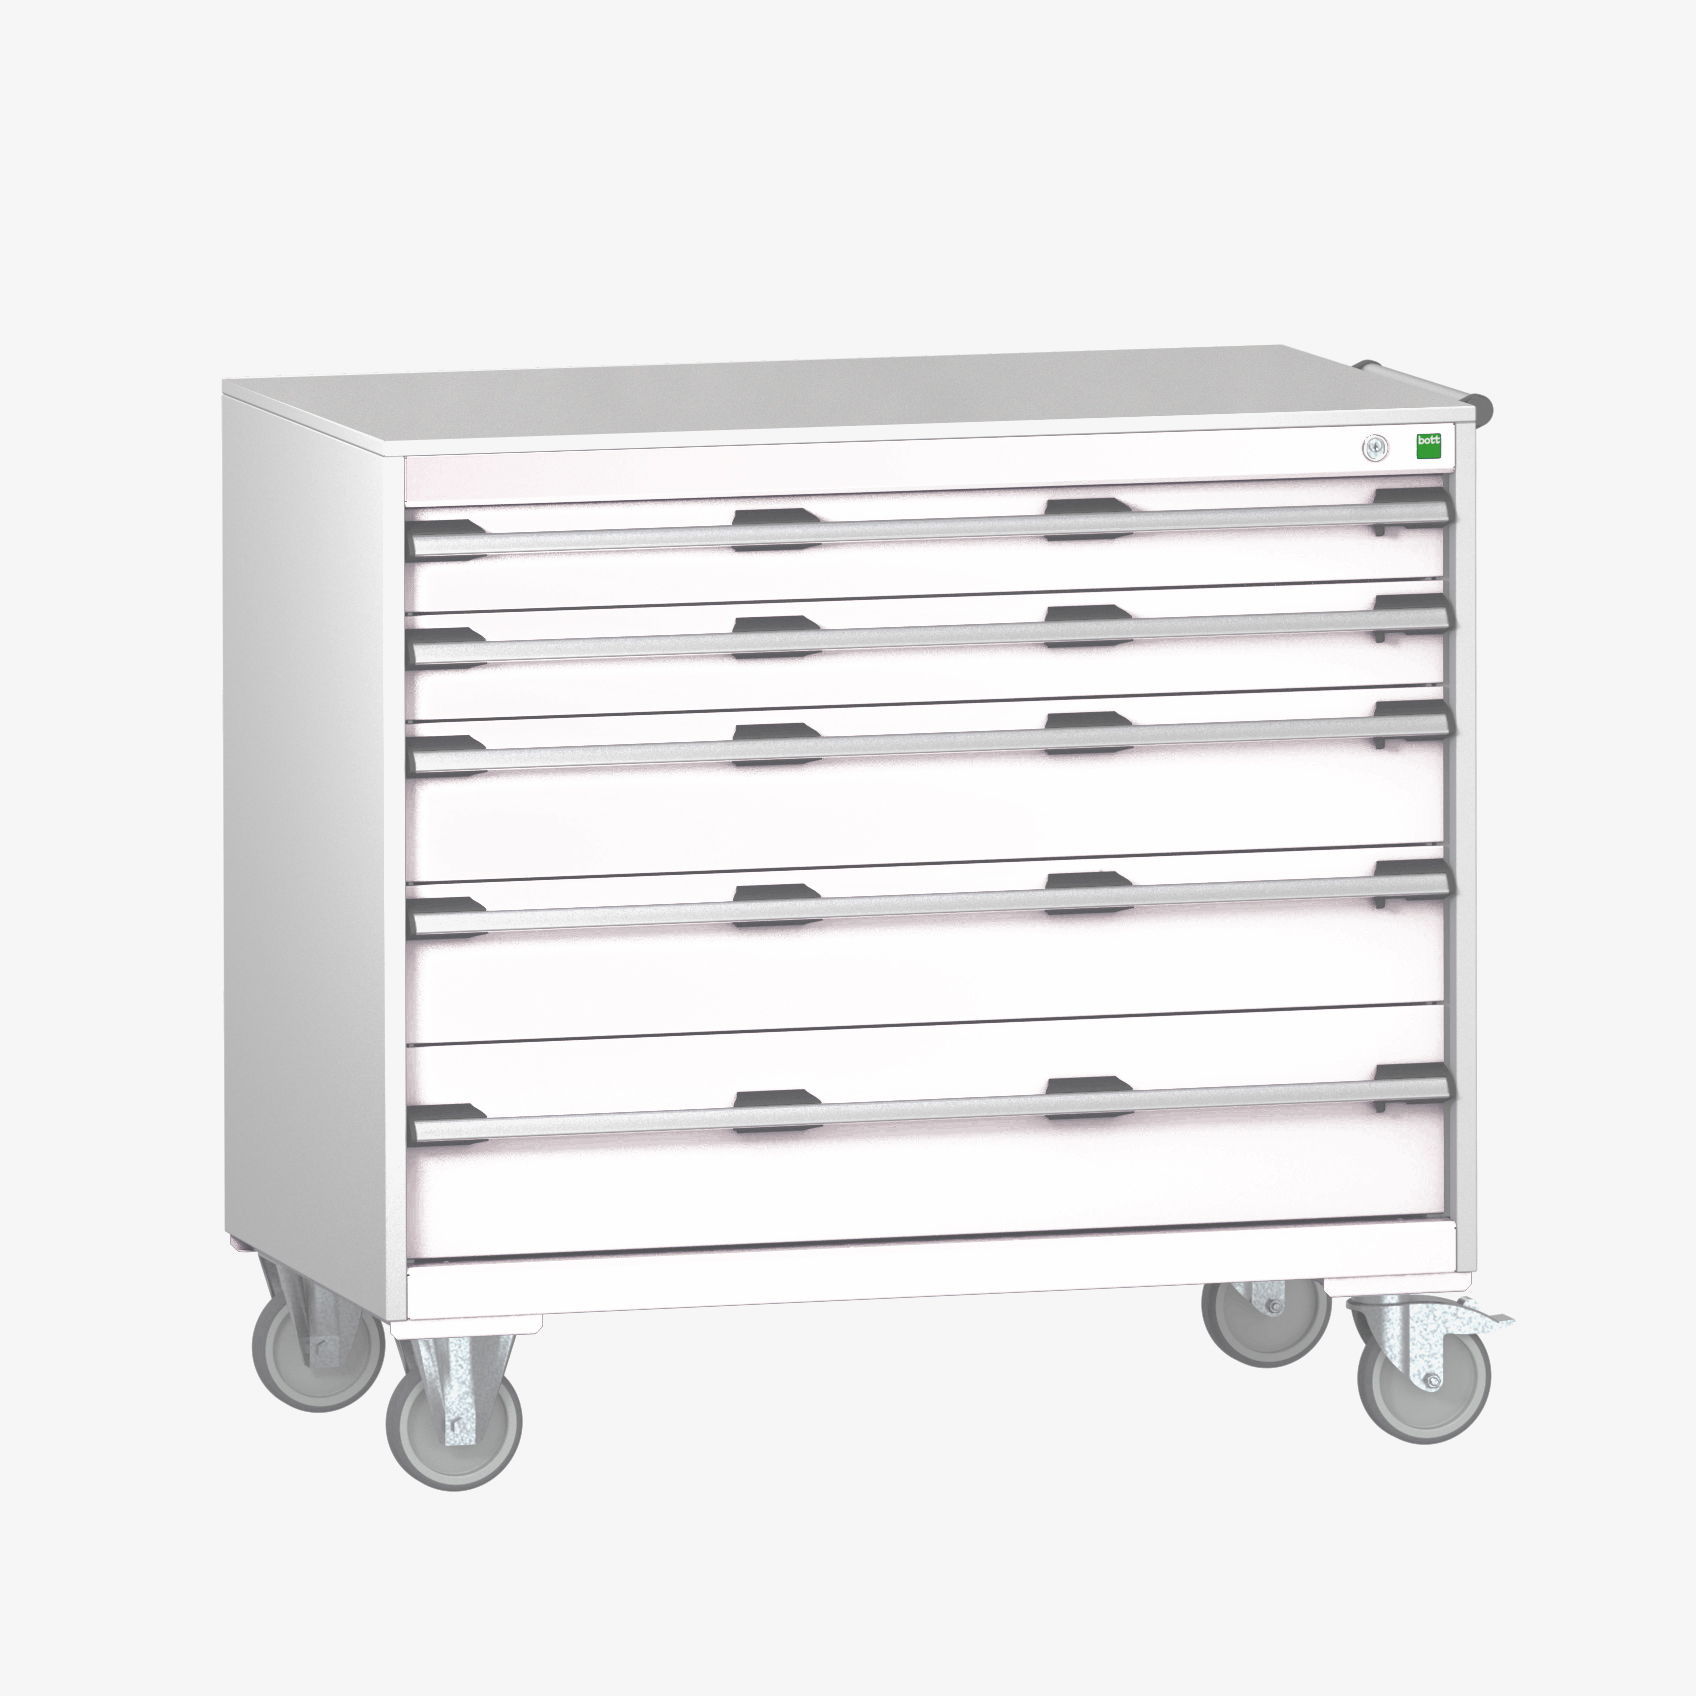 Bott Cubio Mobile Drawer Cabinet With 5 Drawers & Lino Worktop - 40402166.16V